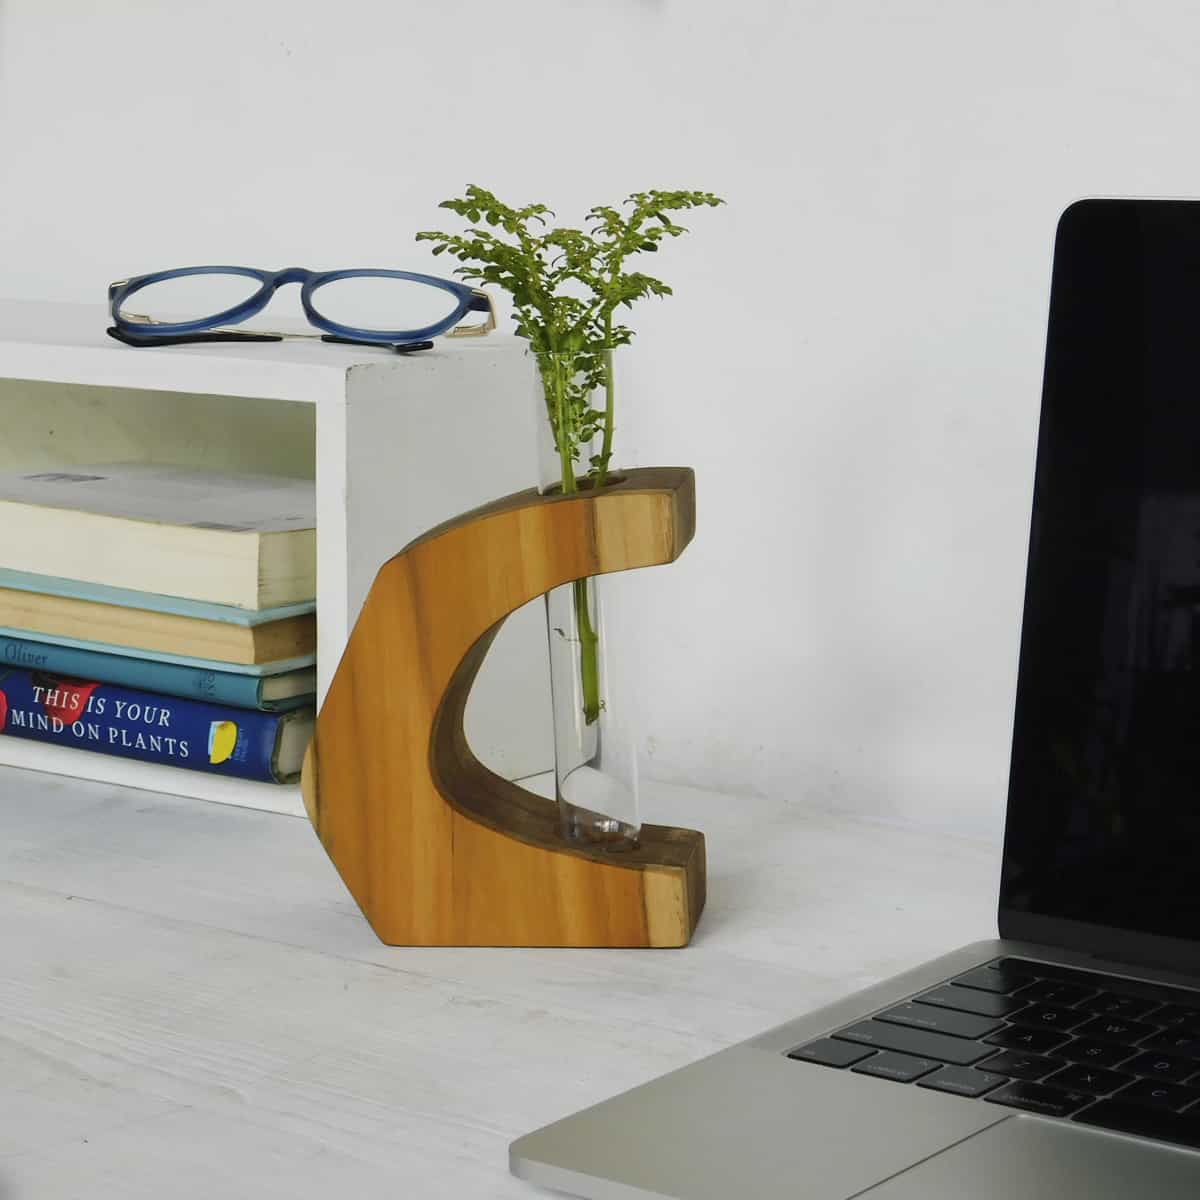  test tube plant holder in a C shaped teak frame on a white desk with books and a computer